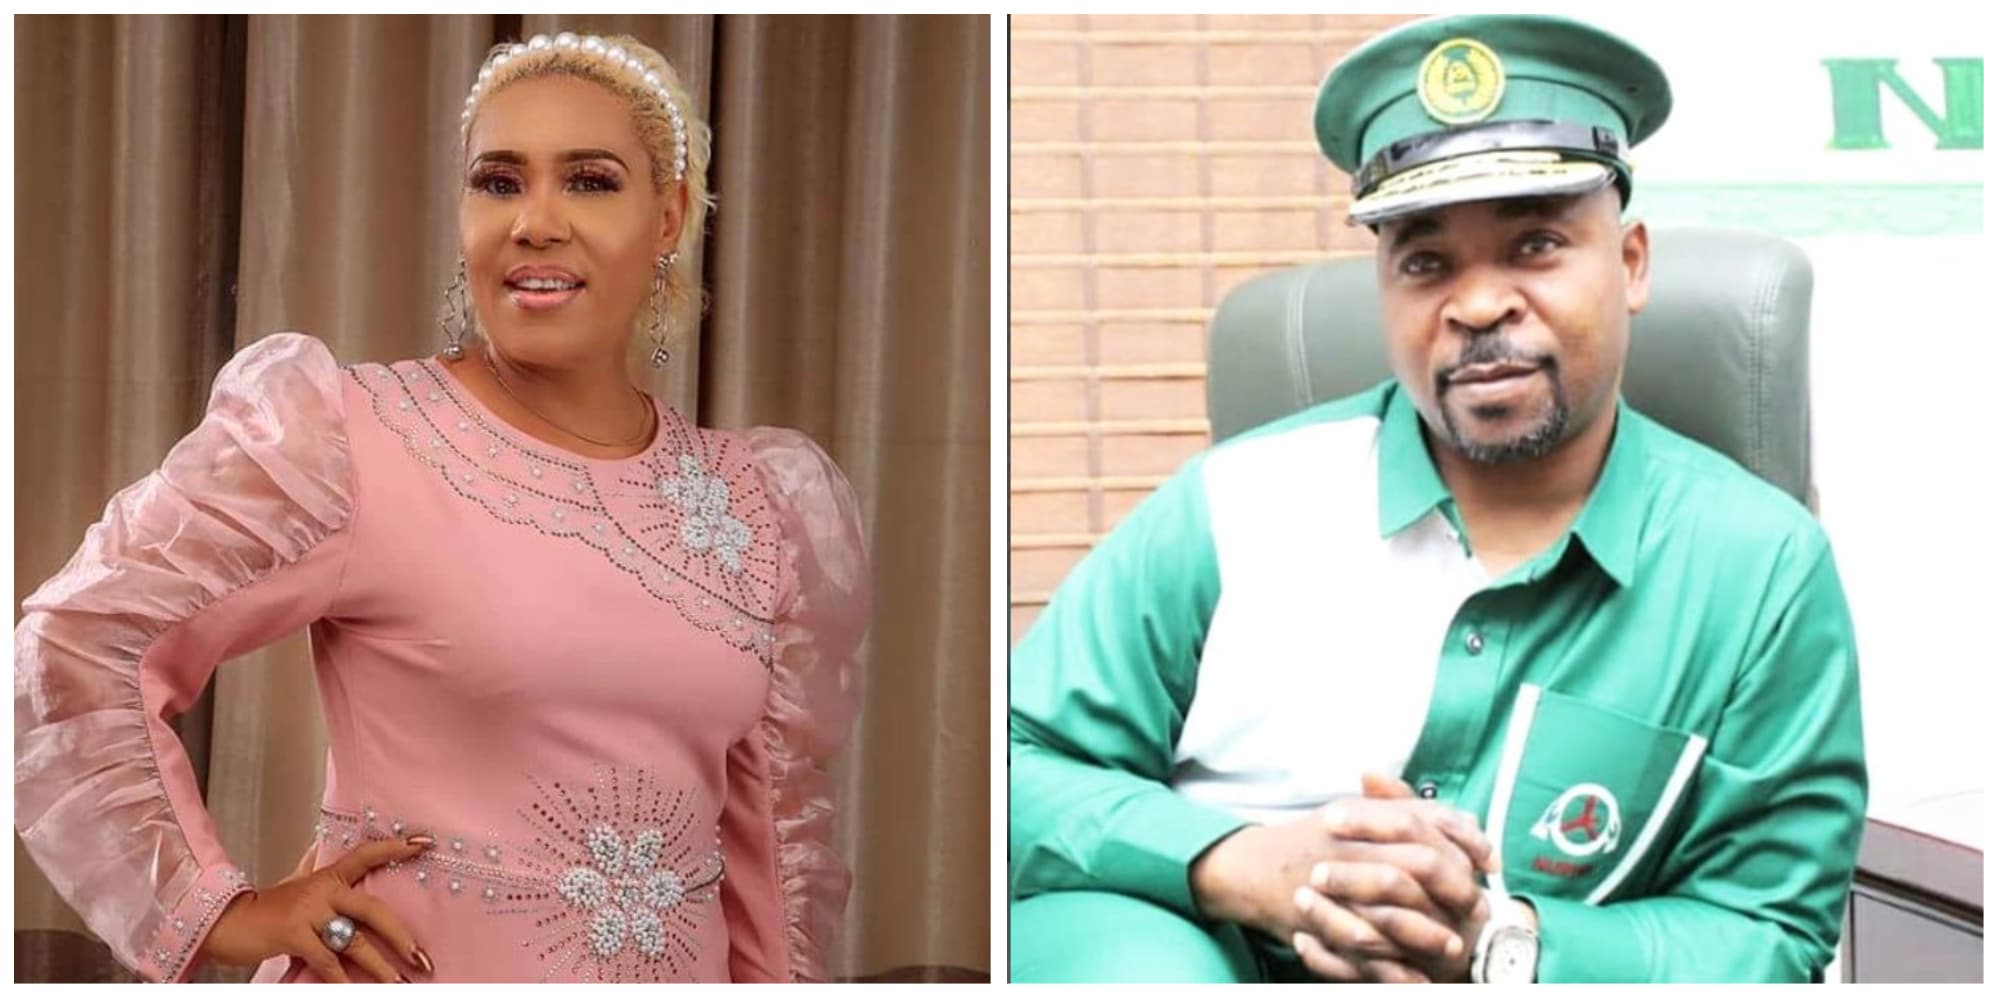 'I Like Bad Bois' - Actress Shan George Publicly Admits To Crush On Road Transport Executive, MC Oluomo